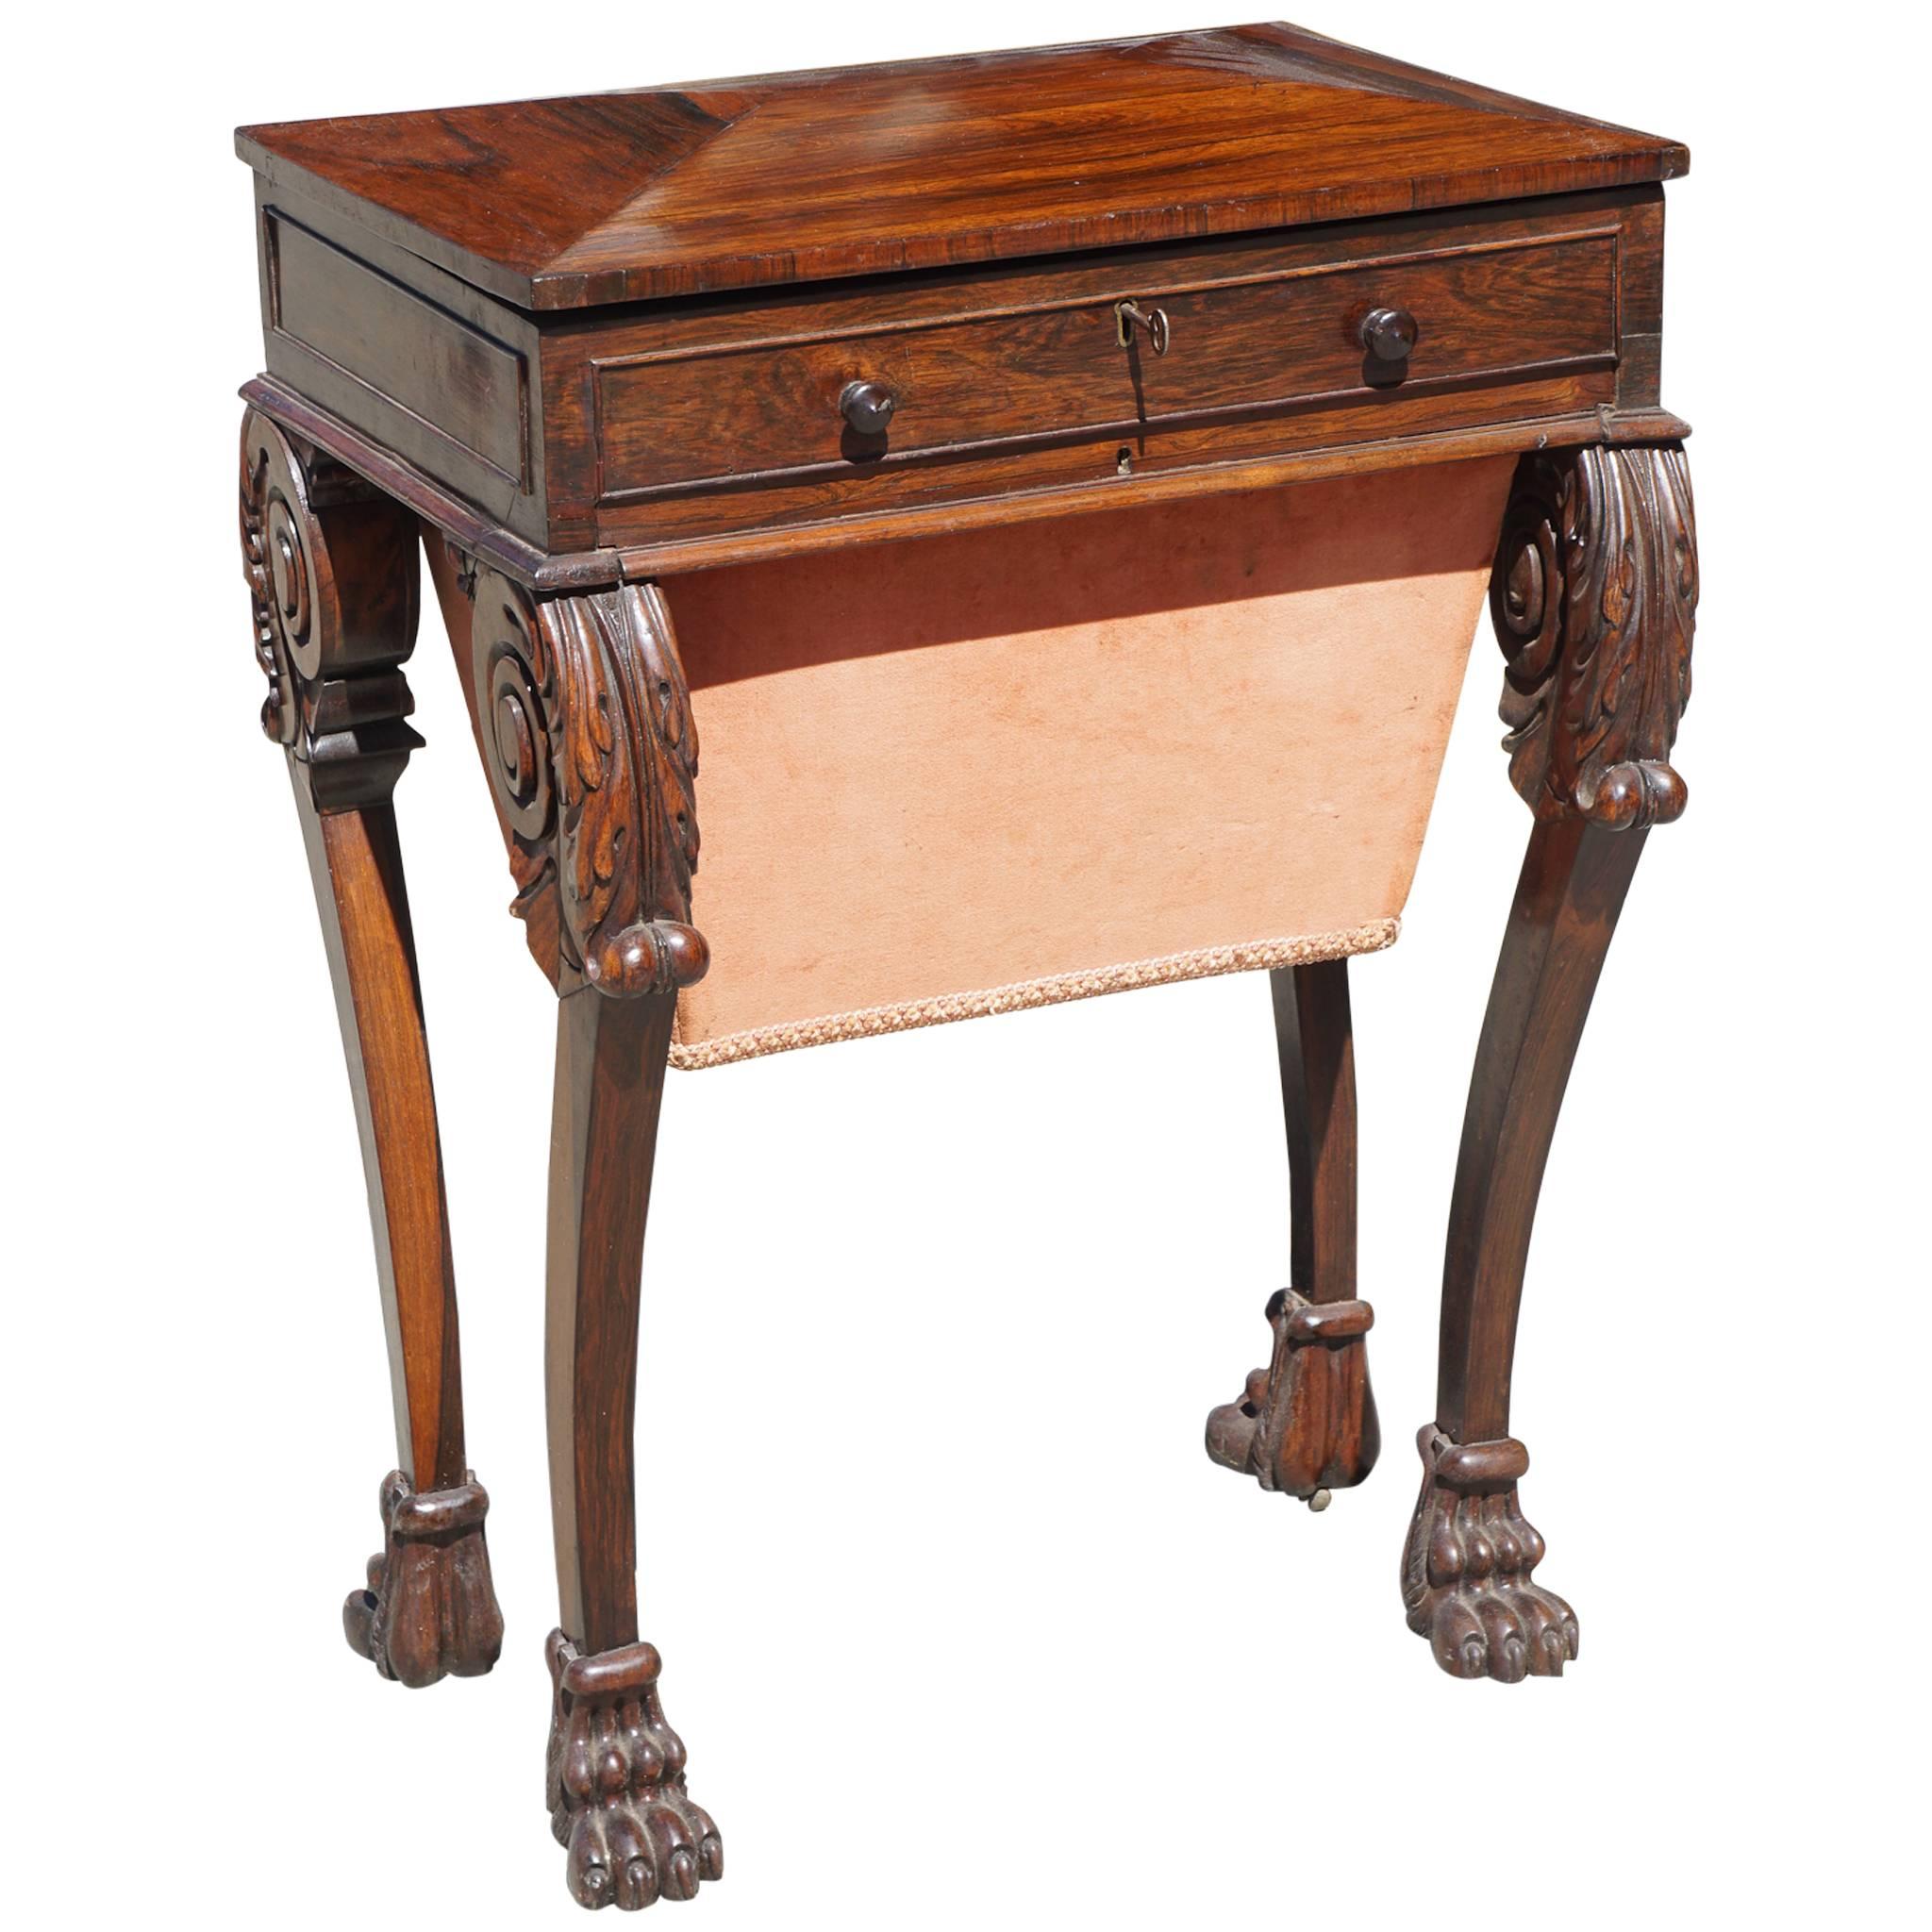 Period Regency Rosewood Work Table For Sale